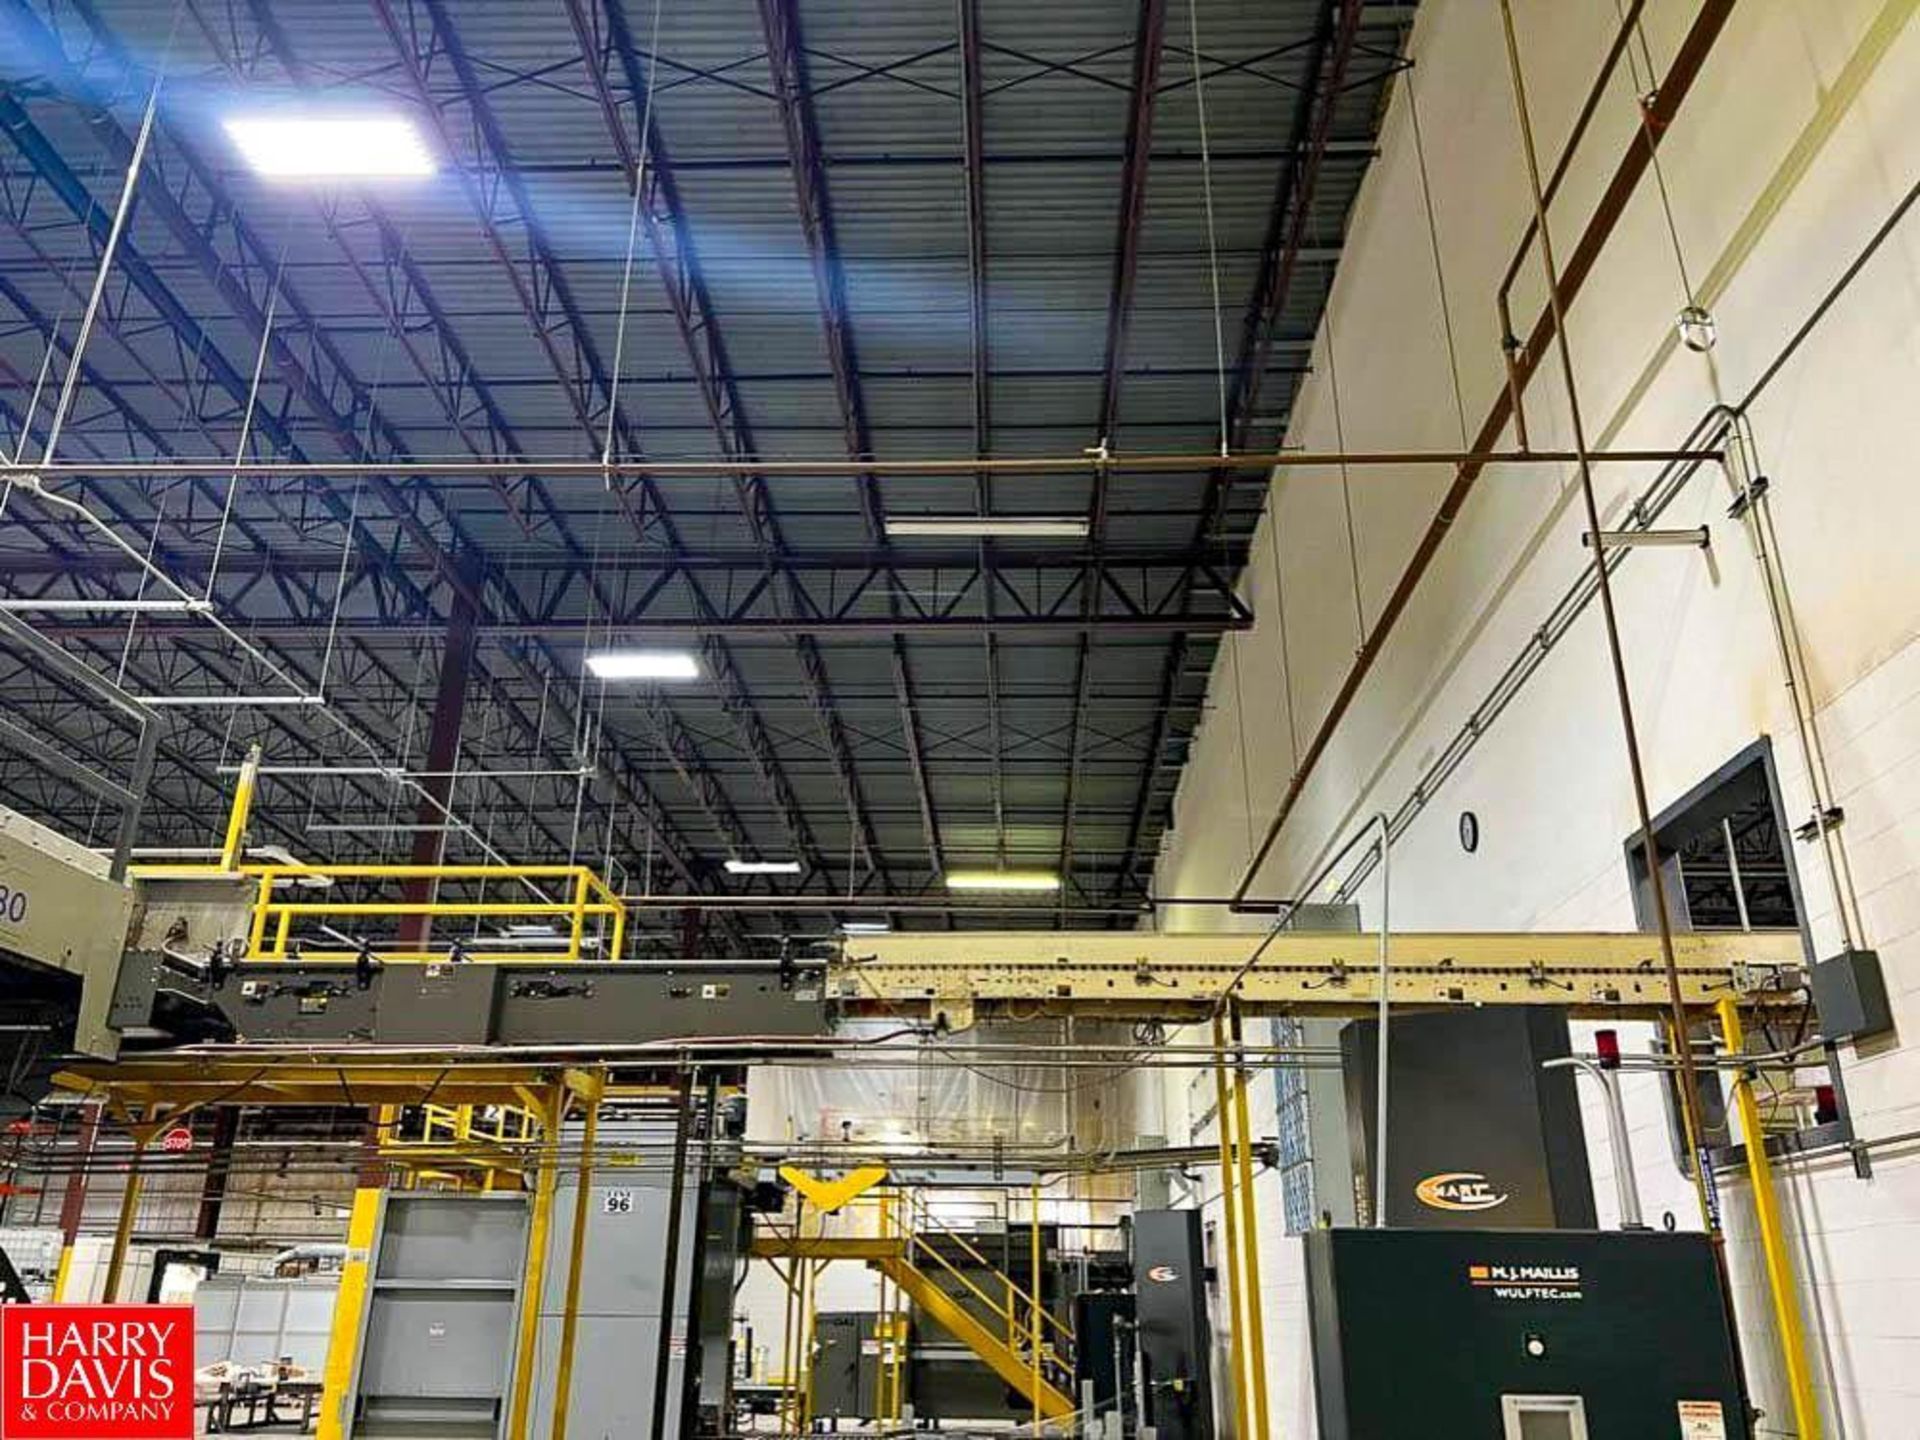 Overhead Serpentine Case Conveyor, Dimensions = 134' (Ends At Palletizer) - Rigging Fee: $2,000 - Image 3 of 3